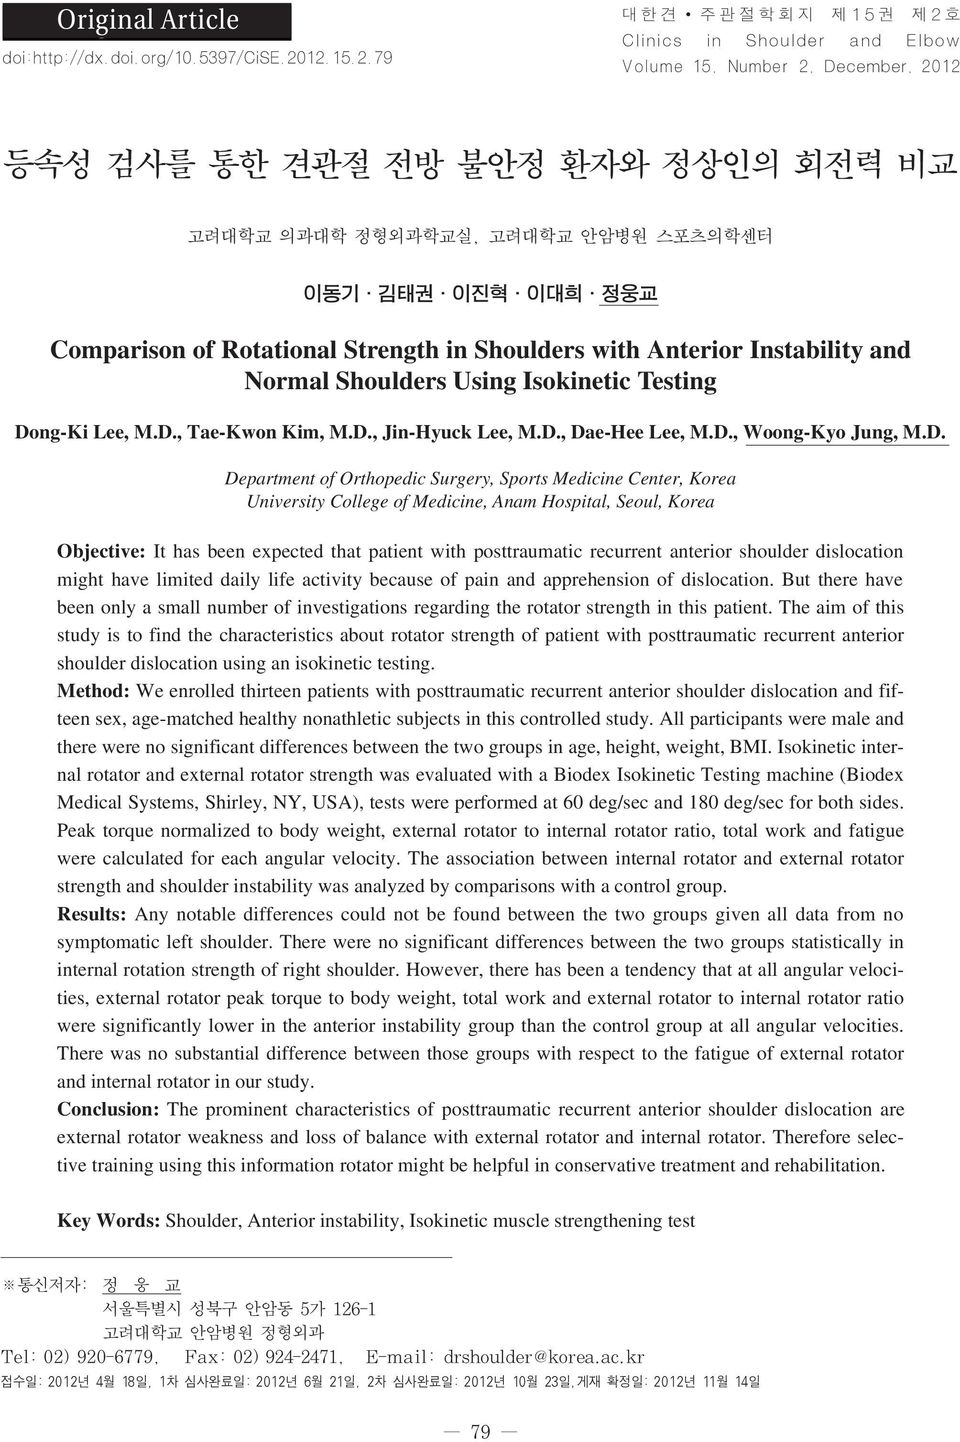 Rotational Strength in Shoulders with Anterior Instability and Normal Shoulders Using Isokinetic Testing Dong-Ki Lee, M.D., Tae-Kwon Kim, M.D., Jin-Hyuck Lee, M.D., Dae-Hee Lee, M.D., Woong-Kyo Jung, M.